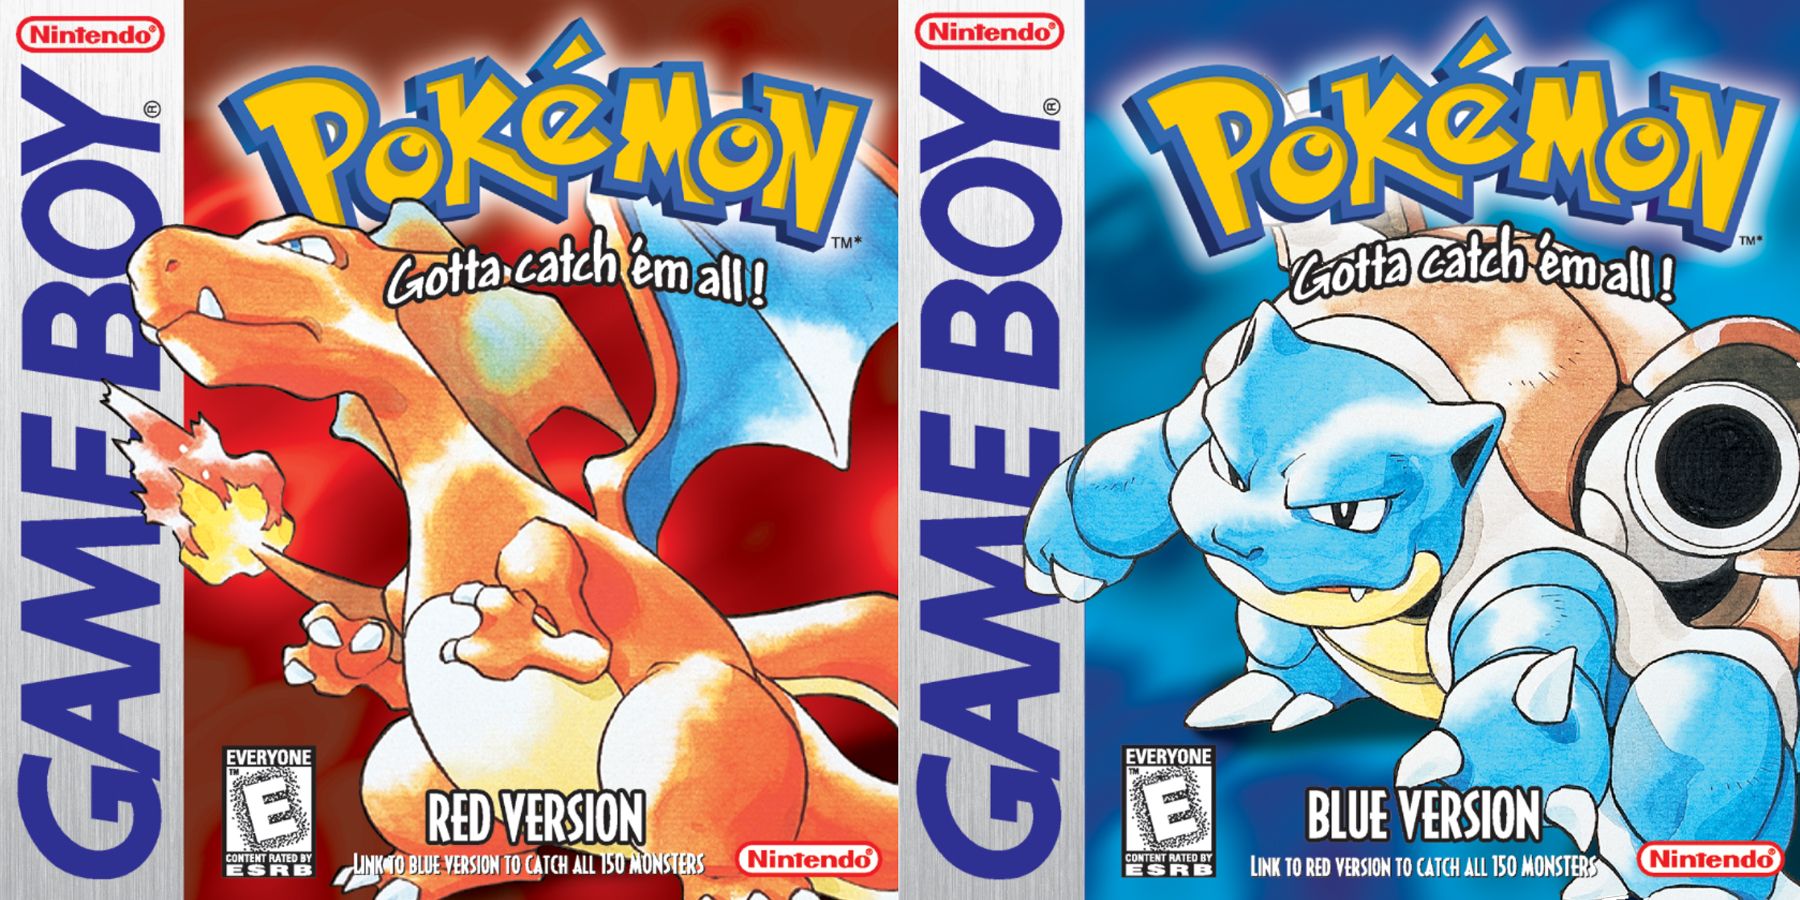 The covers for Pokemon Red and Blue on Game Boy featuring the pokemon mascot and starters, Charizard (left) and Blastoise (right)